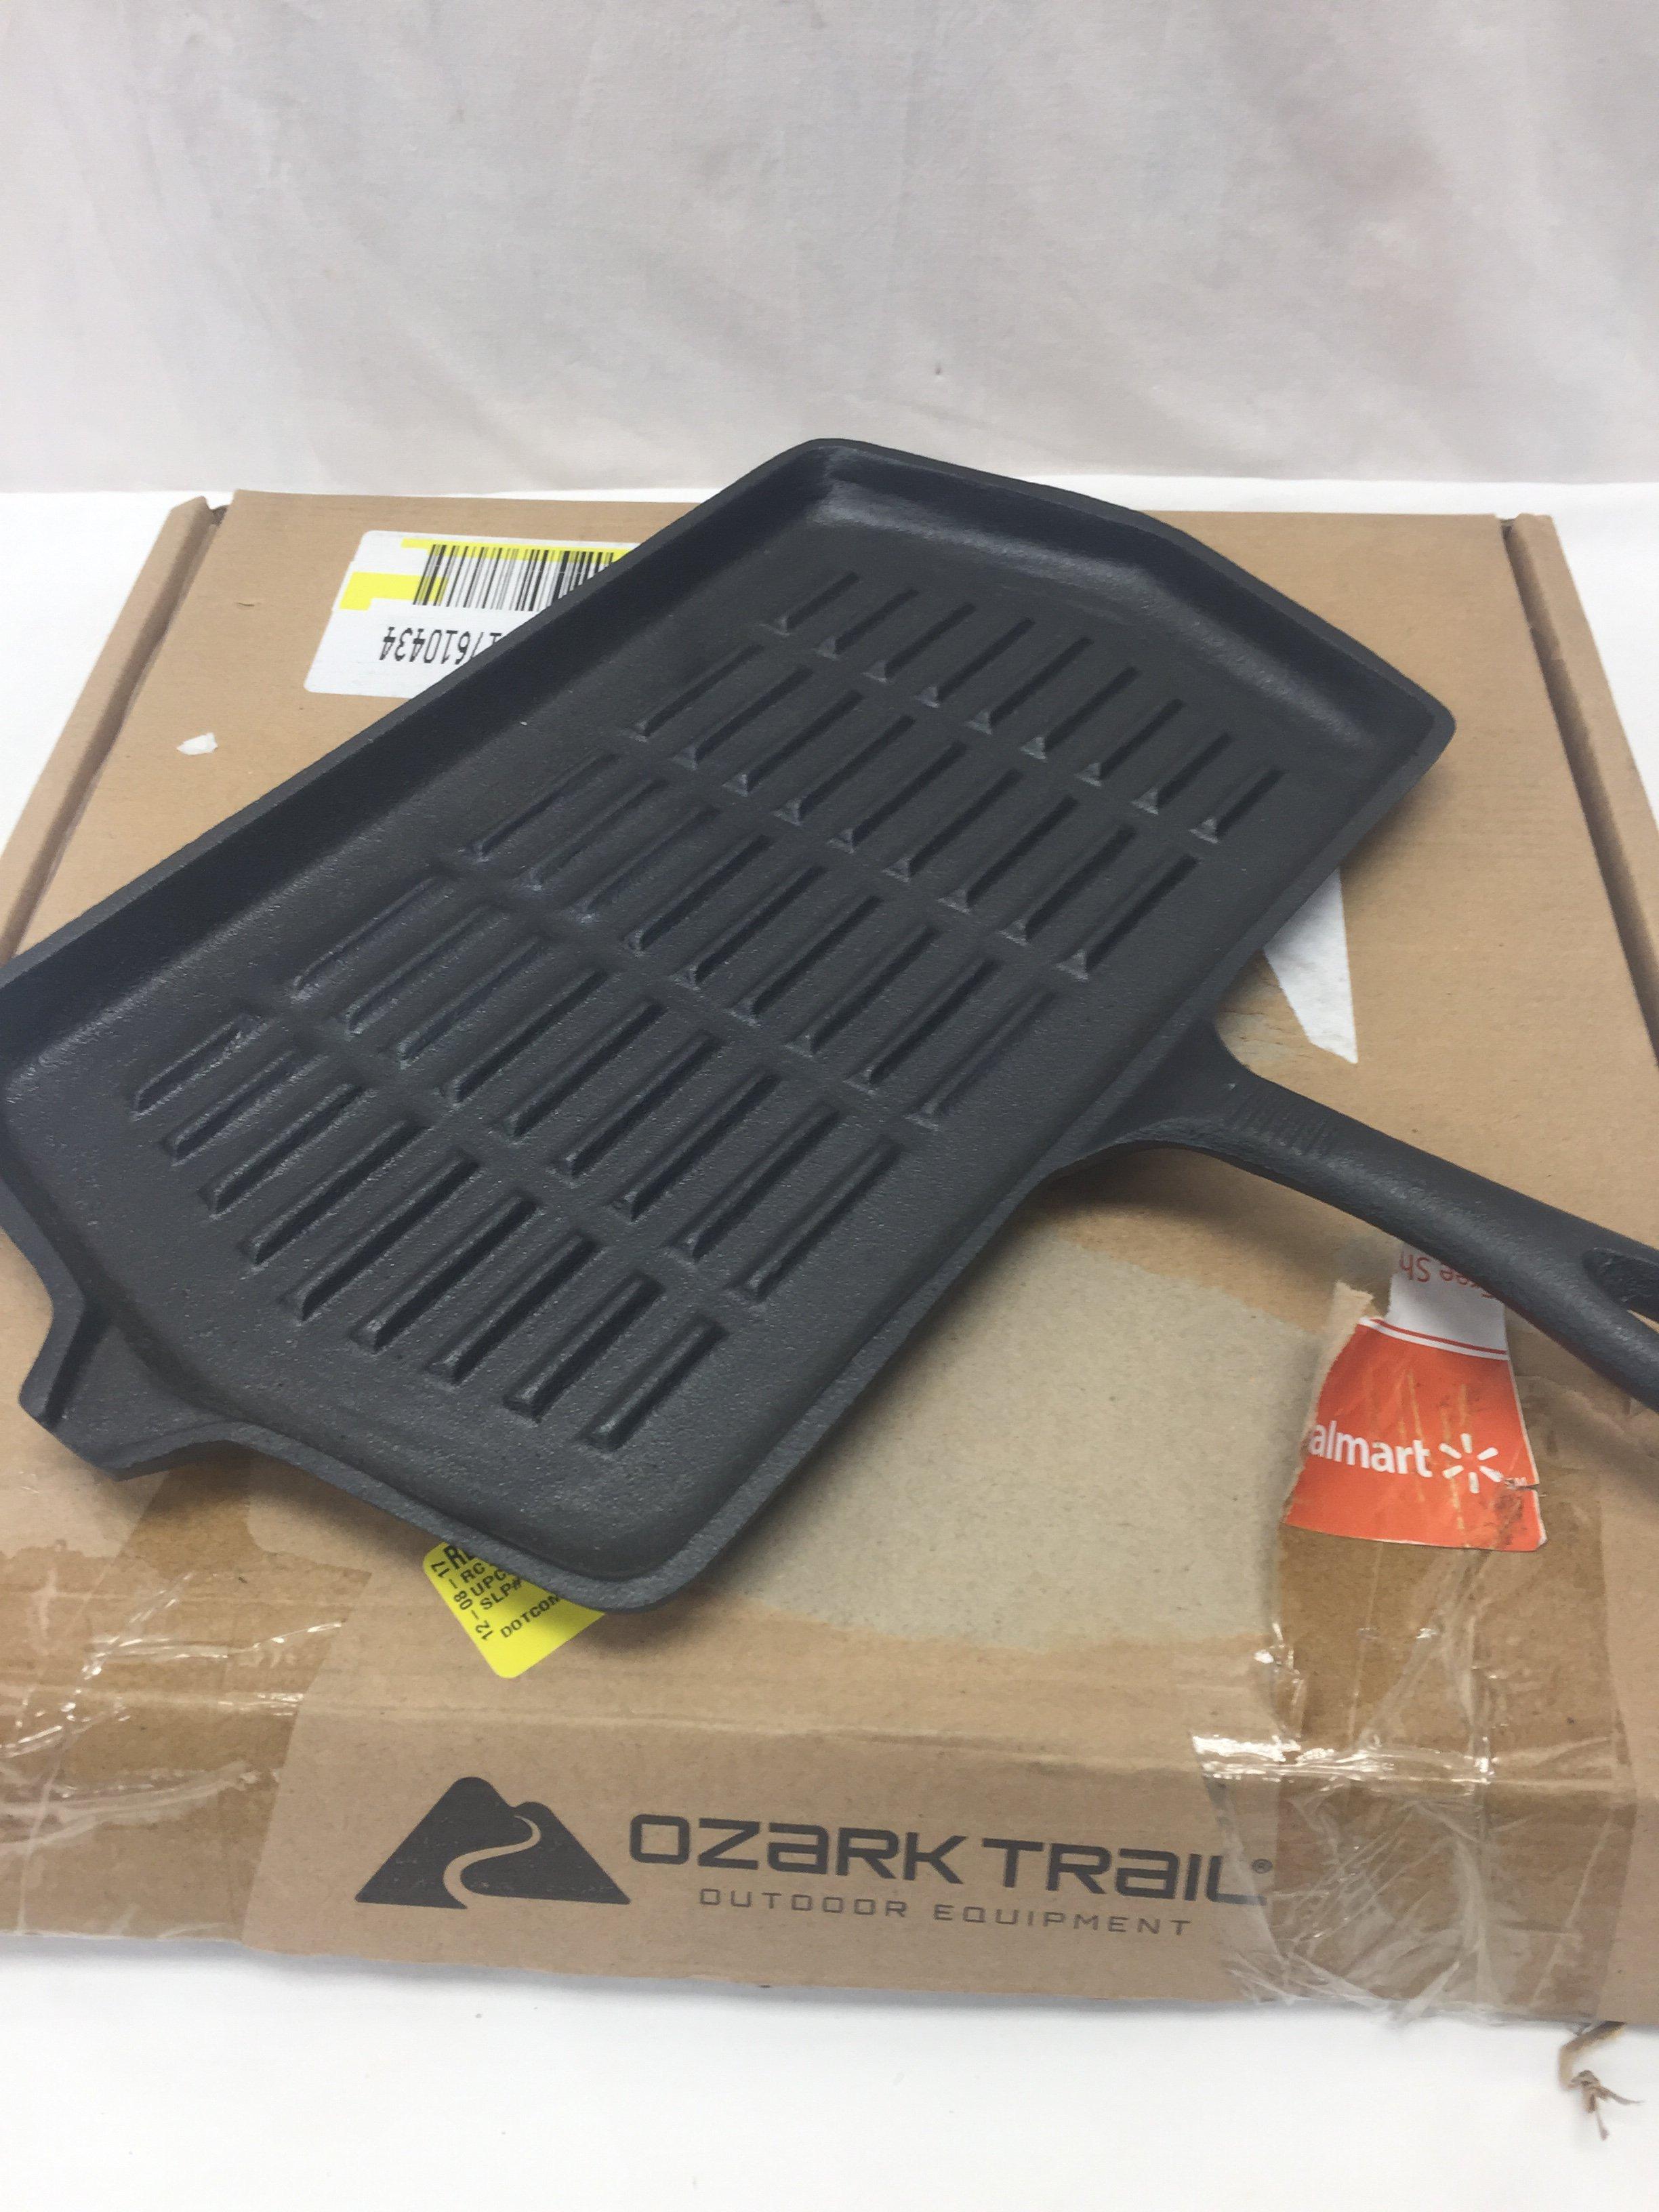 Ozark Trail 14" X 8" Rectangular Cast Iron Griddle with Handle